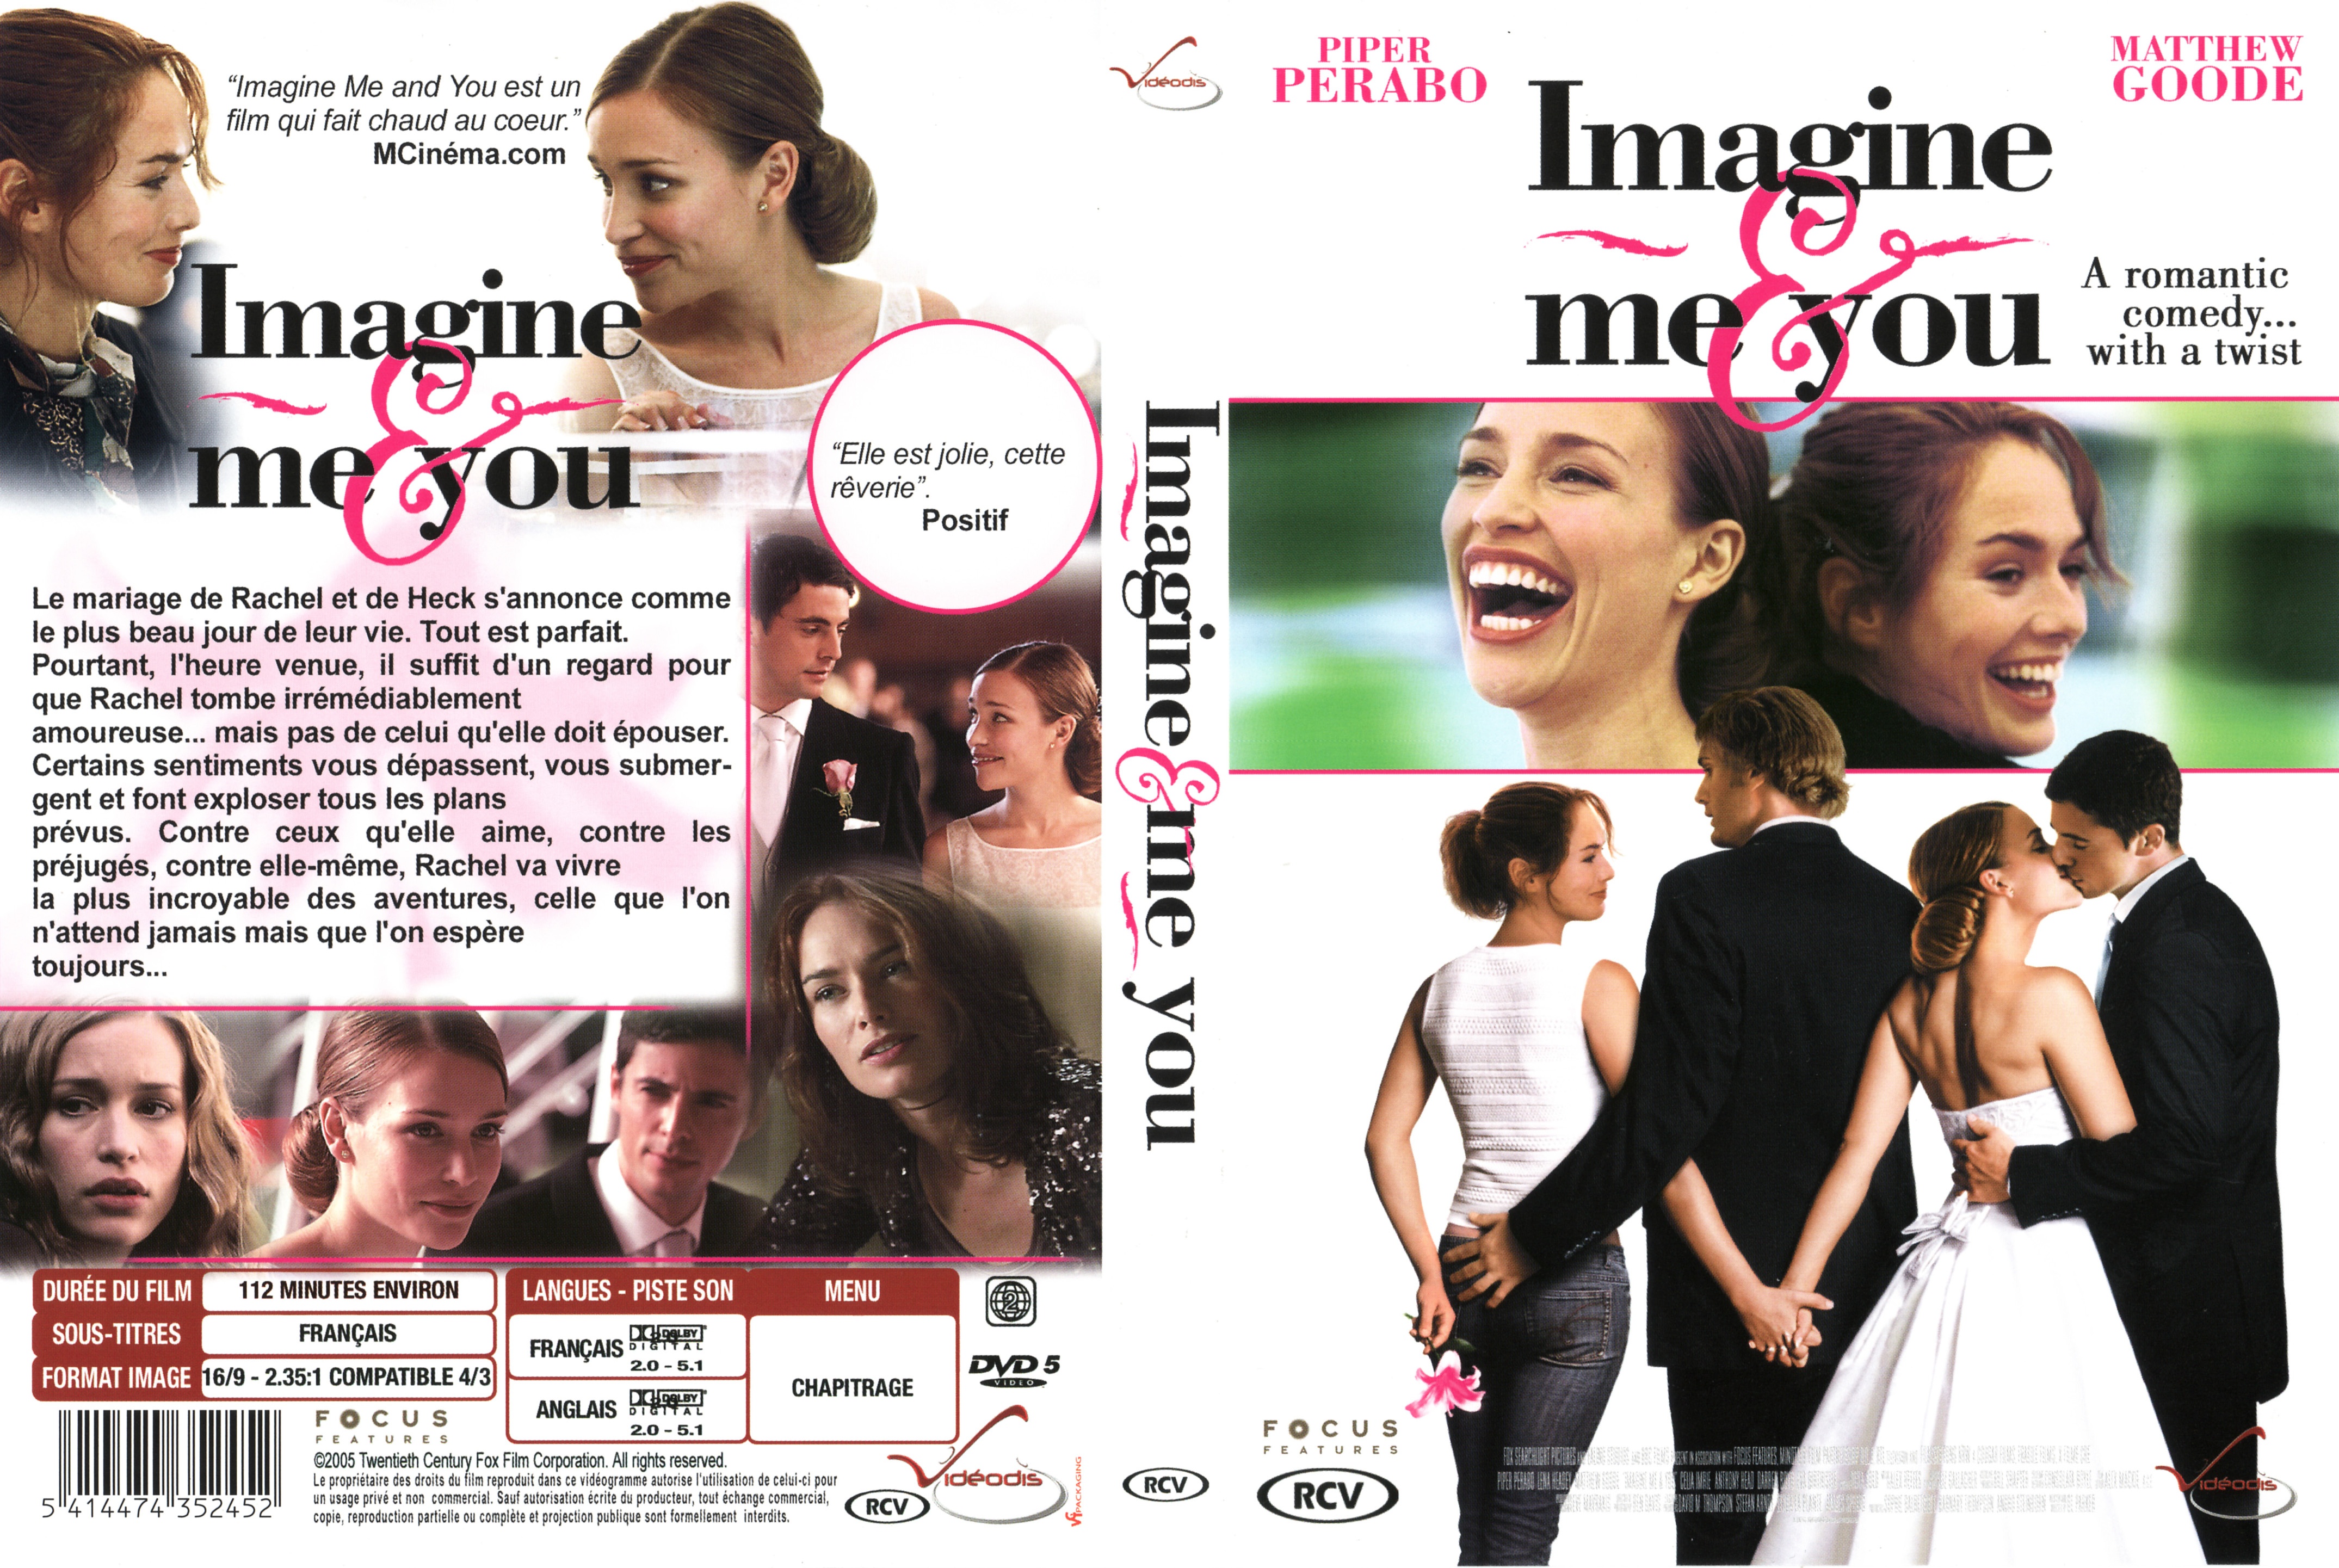 Jaquette DVD Imagine me and you